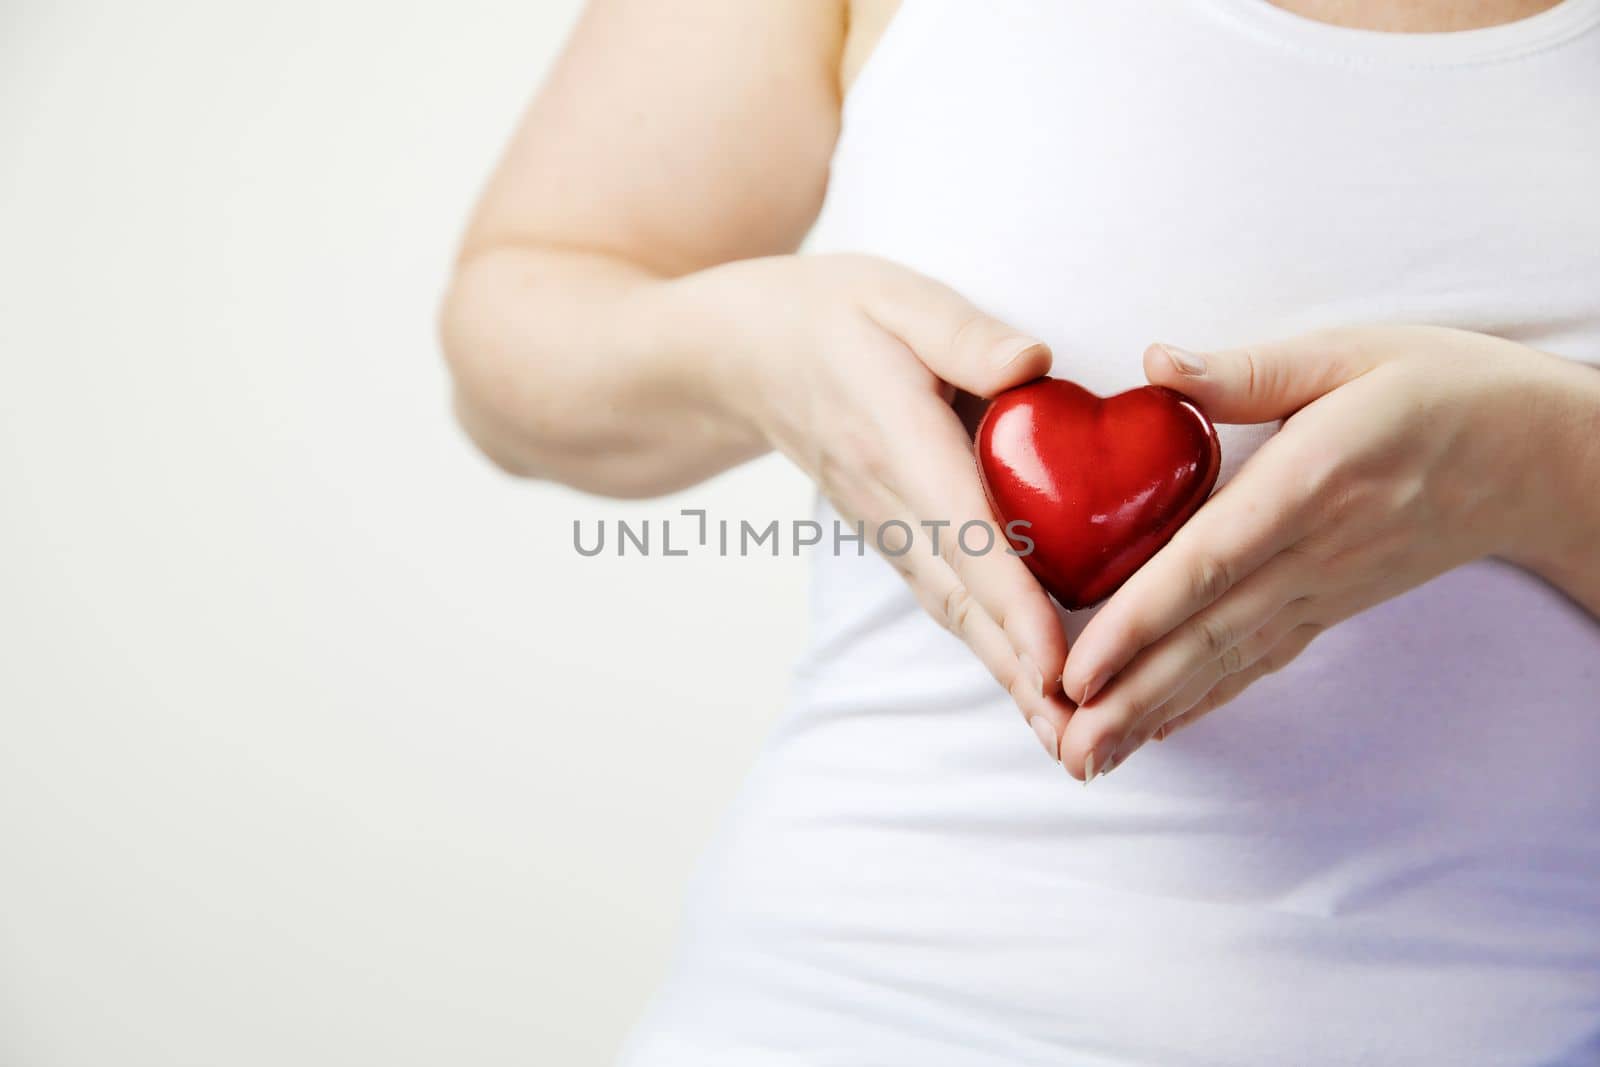 health, medicine and charity concept close up of female hands with small red heart holding for breast on white background copy space awareness